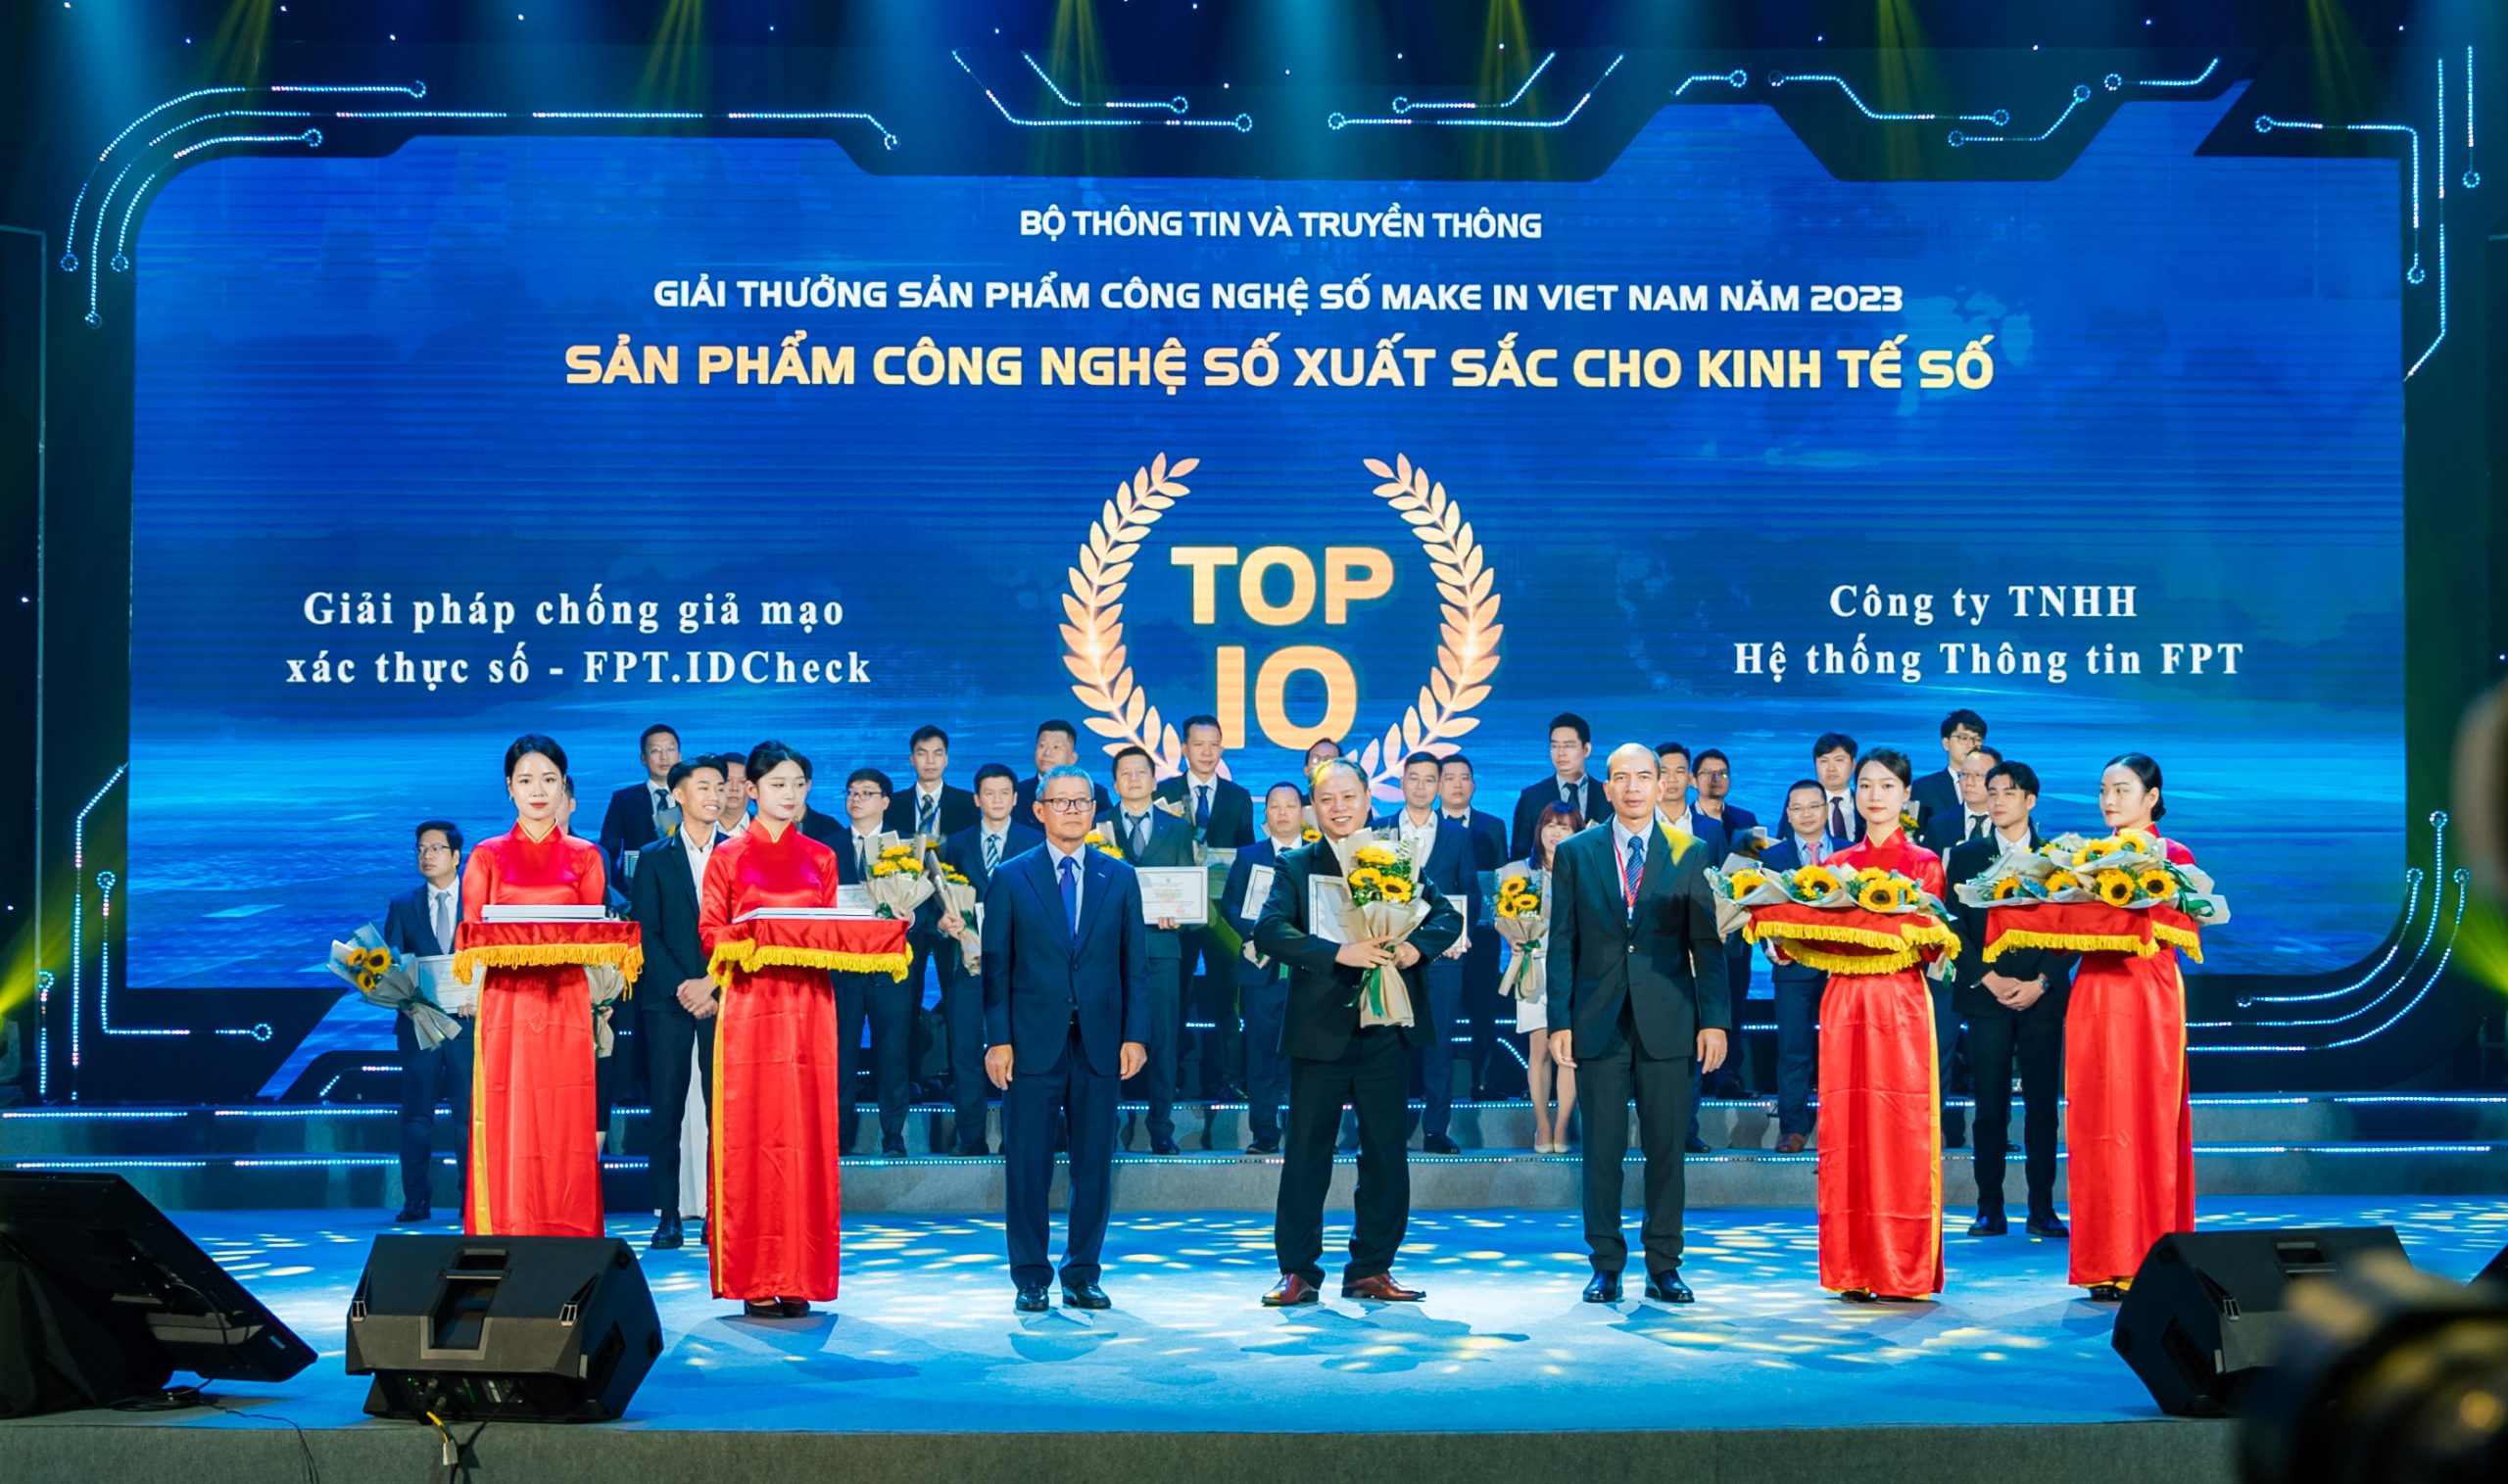 Make in Viet Nam Digital Technology Product Awards 2023 – Top 10 Digital Technology Products for the Digital Economy category – Anti-fraud Solution for Digital Identity Verification (FPT.IDCheck)